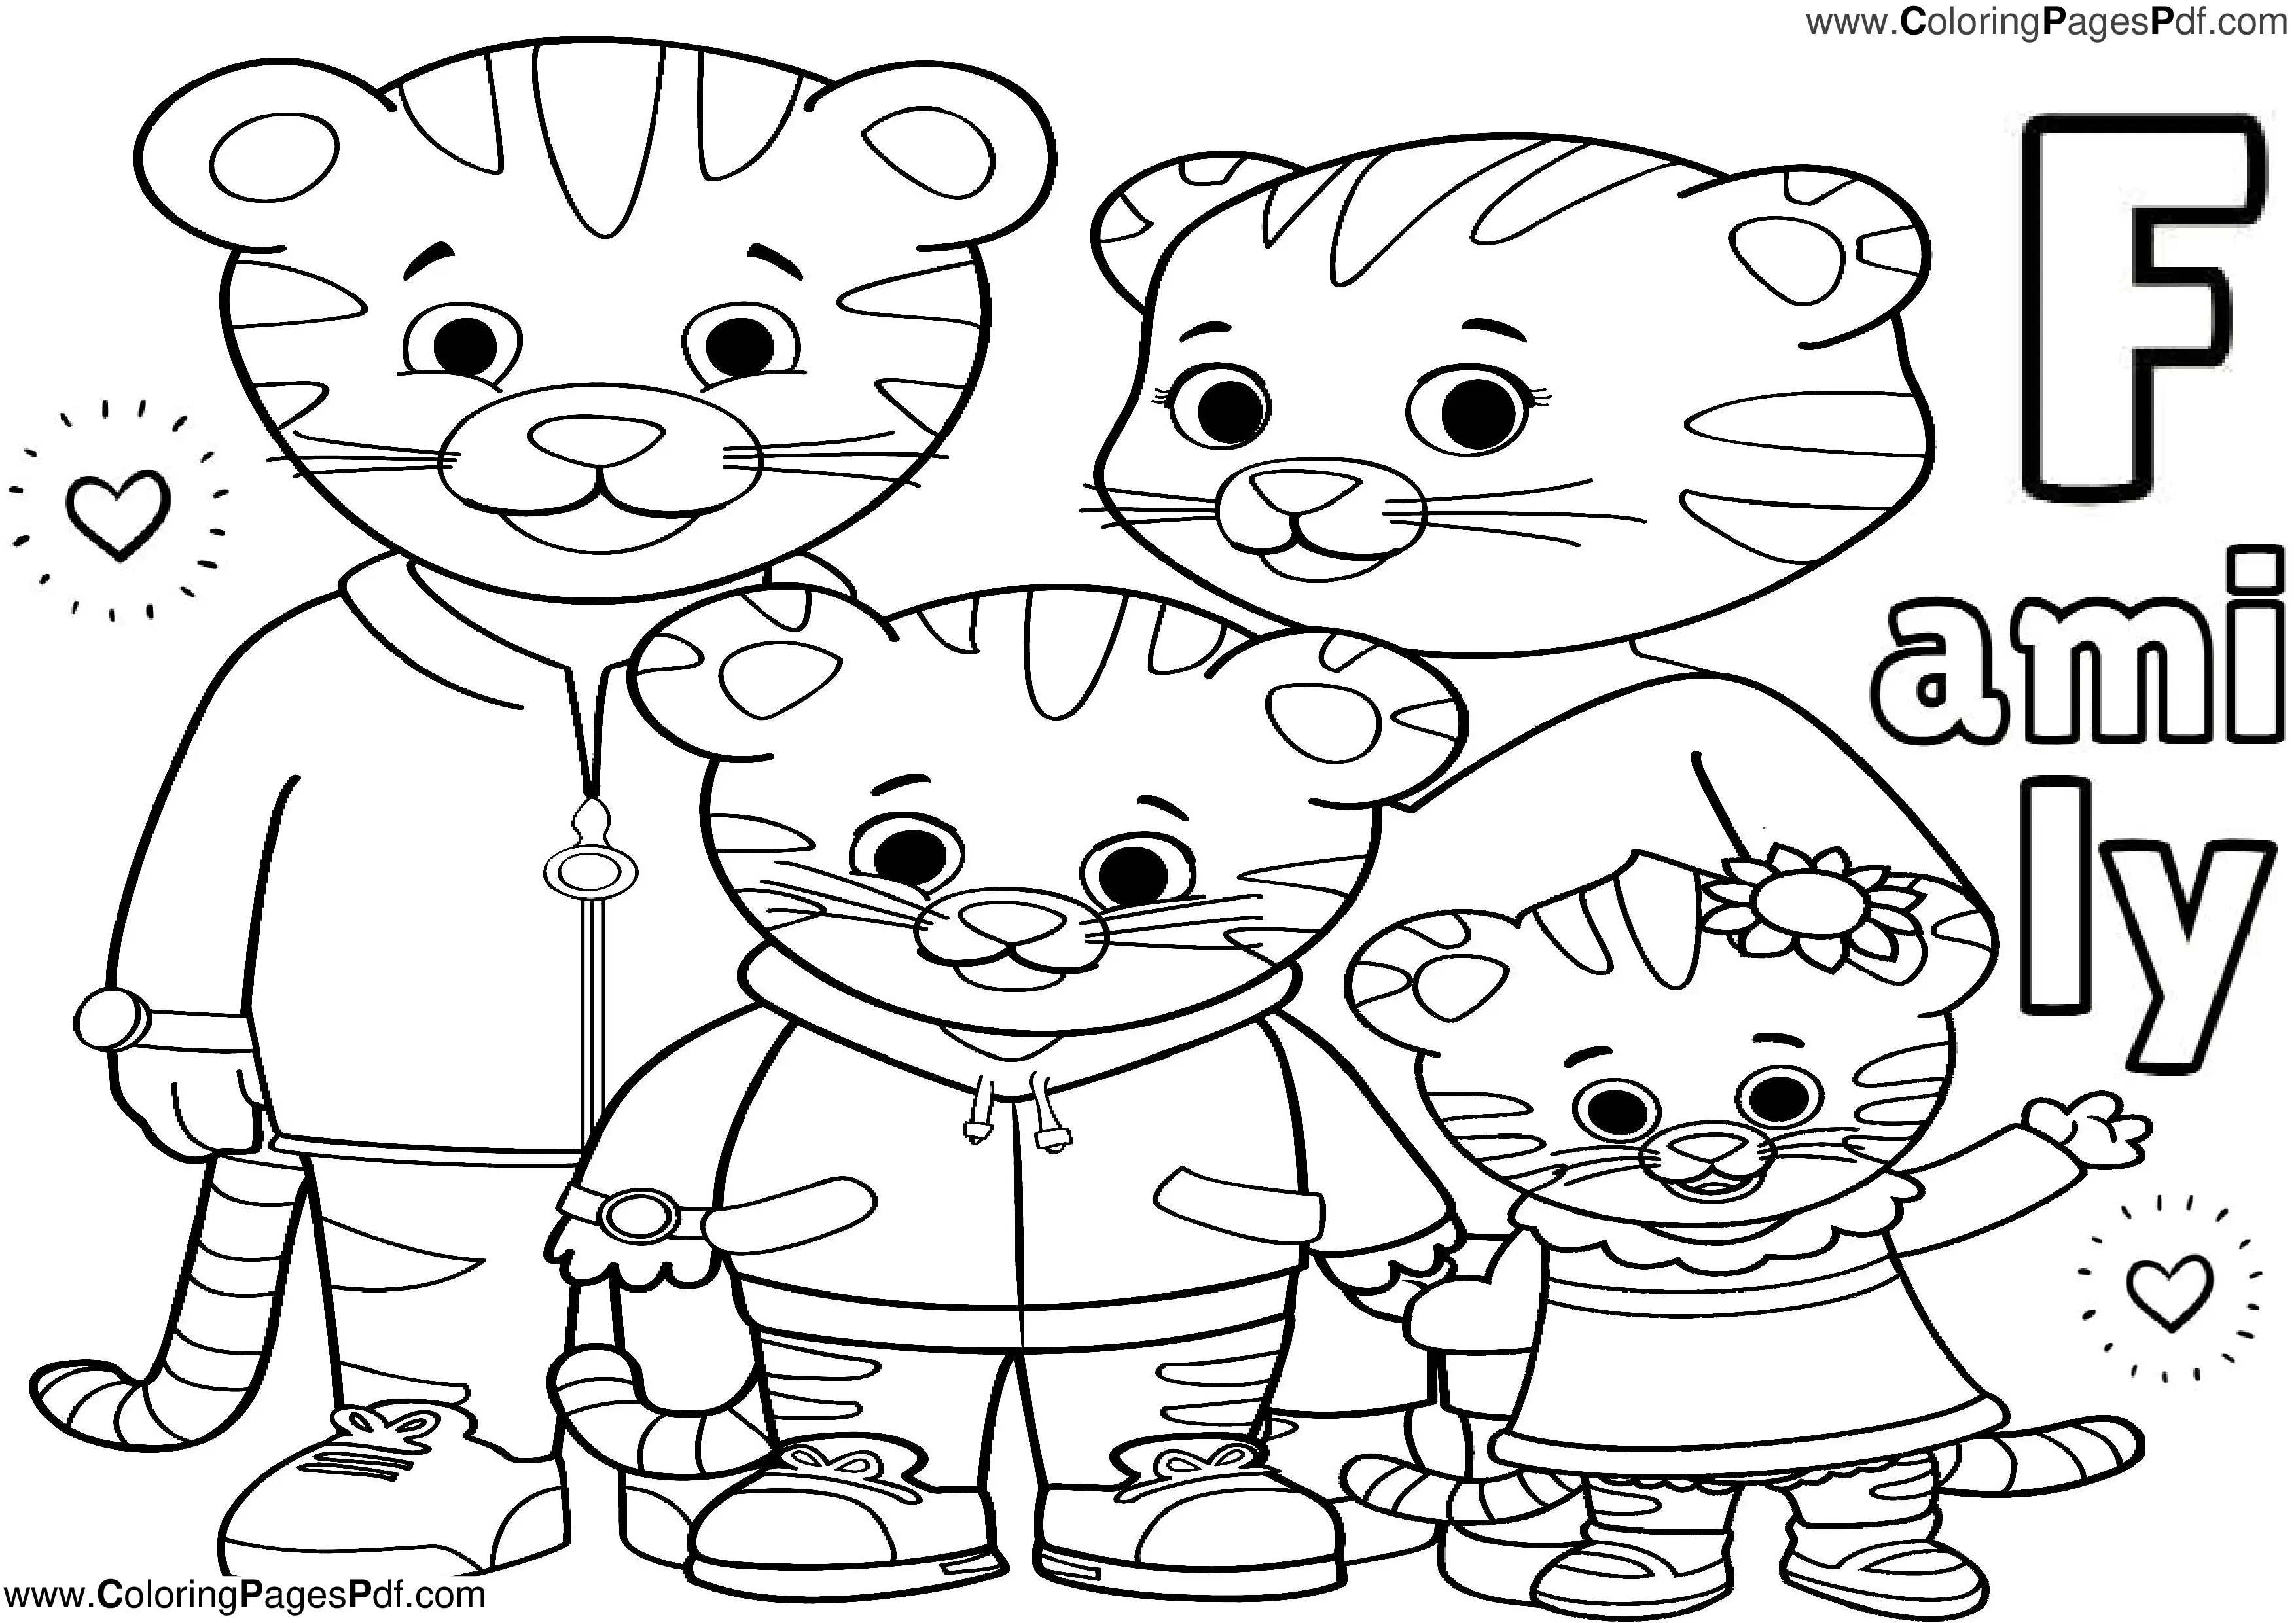 Daniel Tiger Pictures to print